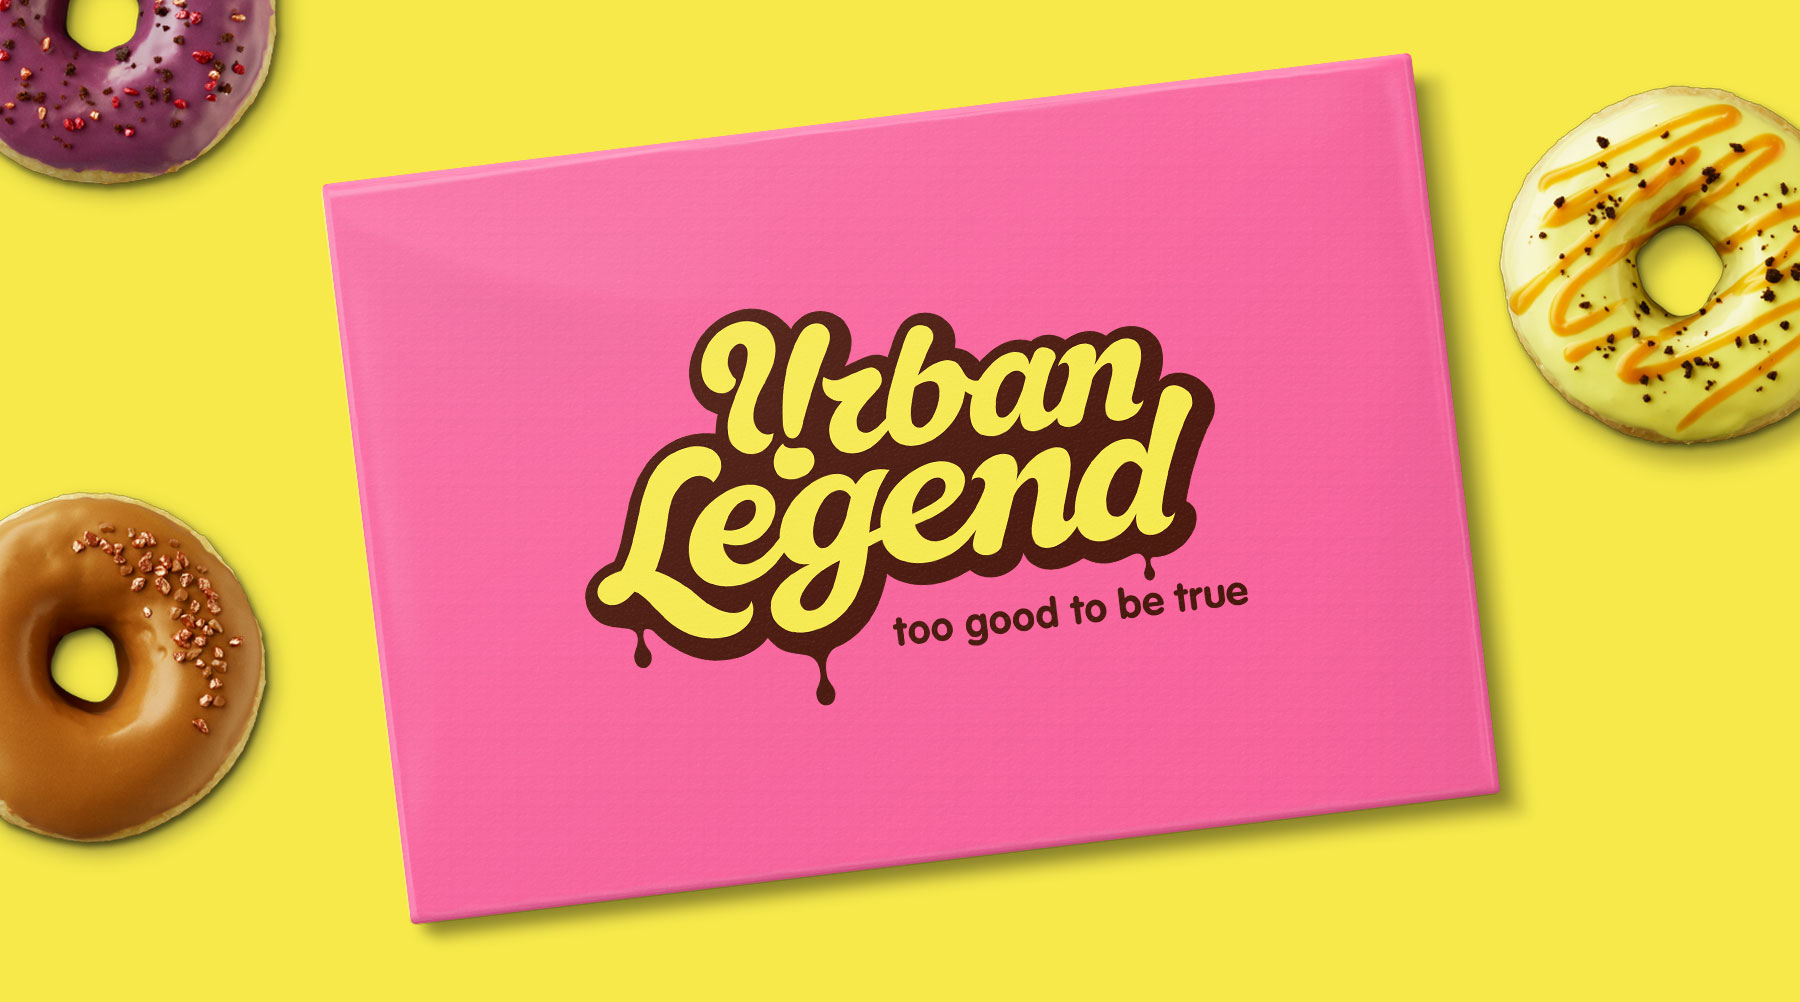 Top of a pink Urban Legend donut box on a yellow background with 3 Urban Legend Donuts design by Biles Hendry